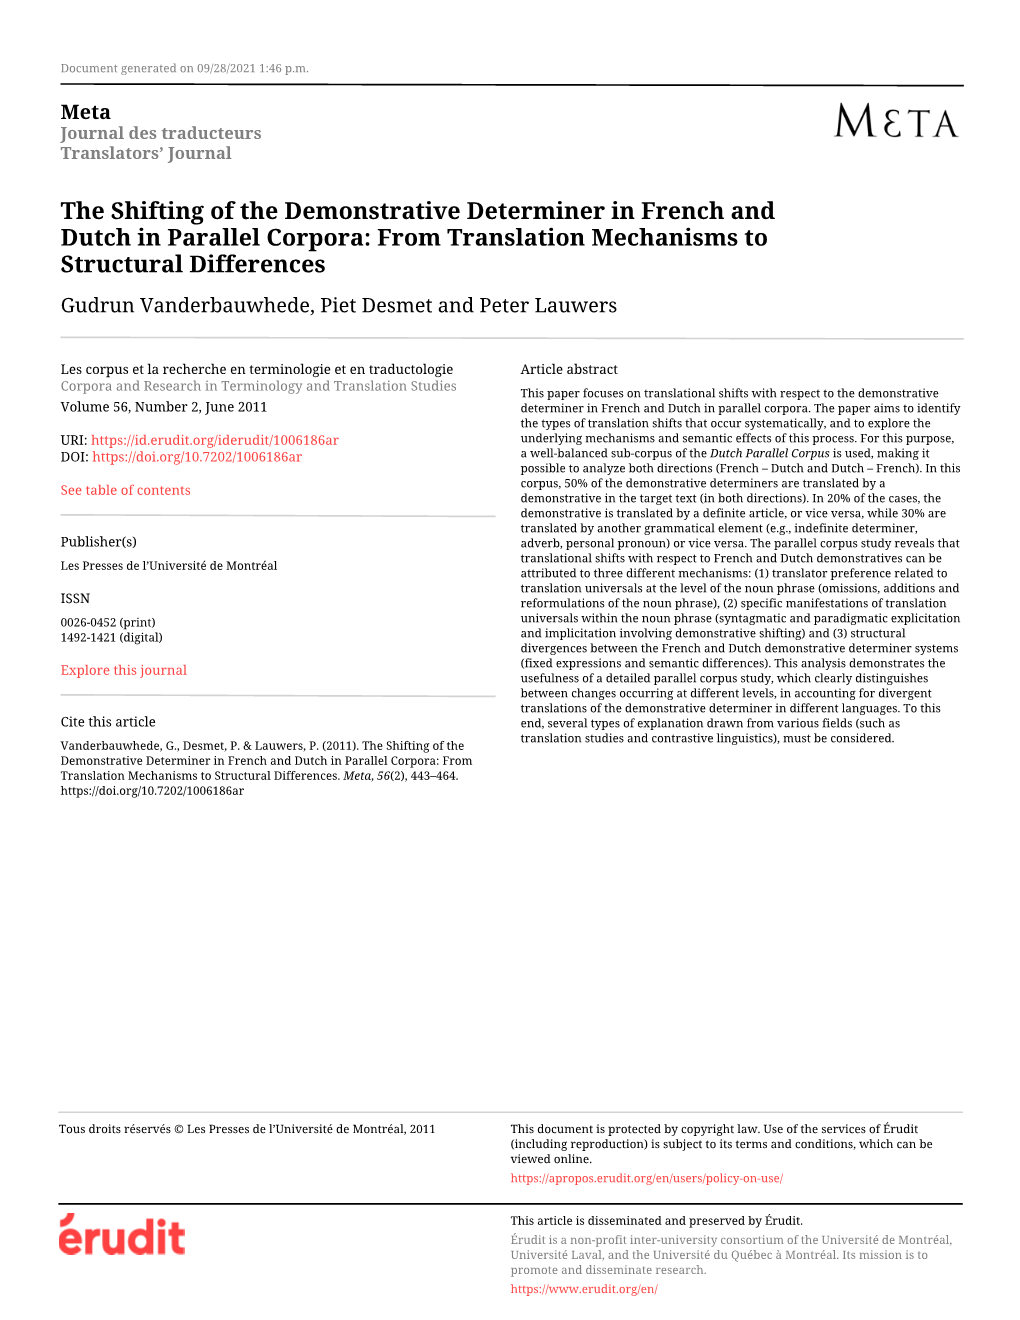 The Shifting of the Demonstrative Determiner in French and Dutch In